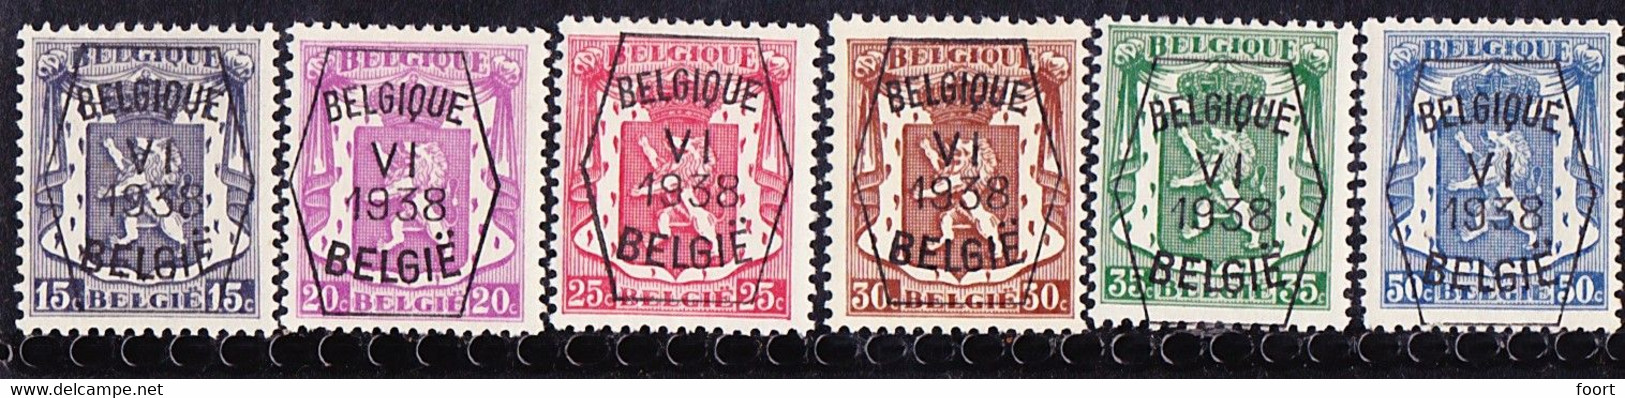 Belgie Nr. 363/368 - Typo Precancels 1936-51 (Small Seal Of The State)